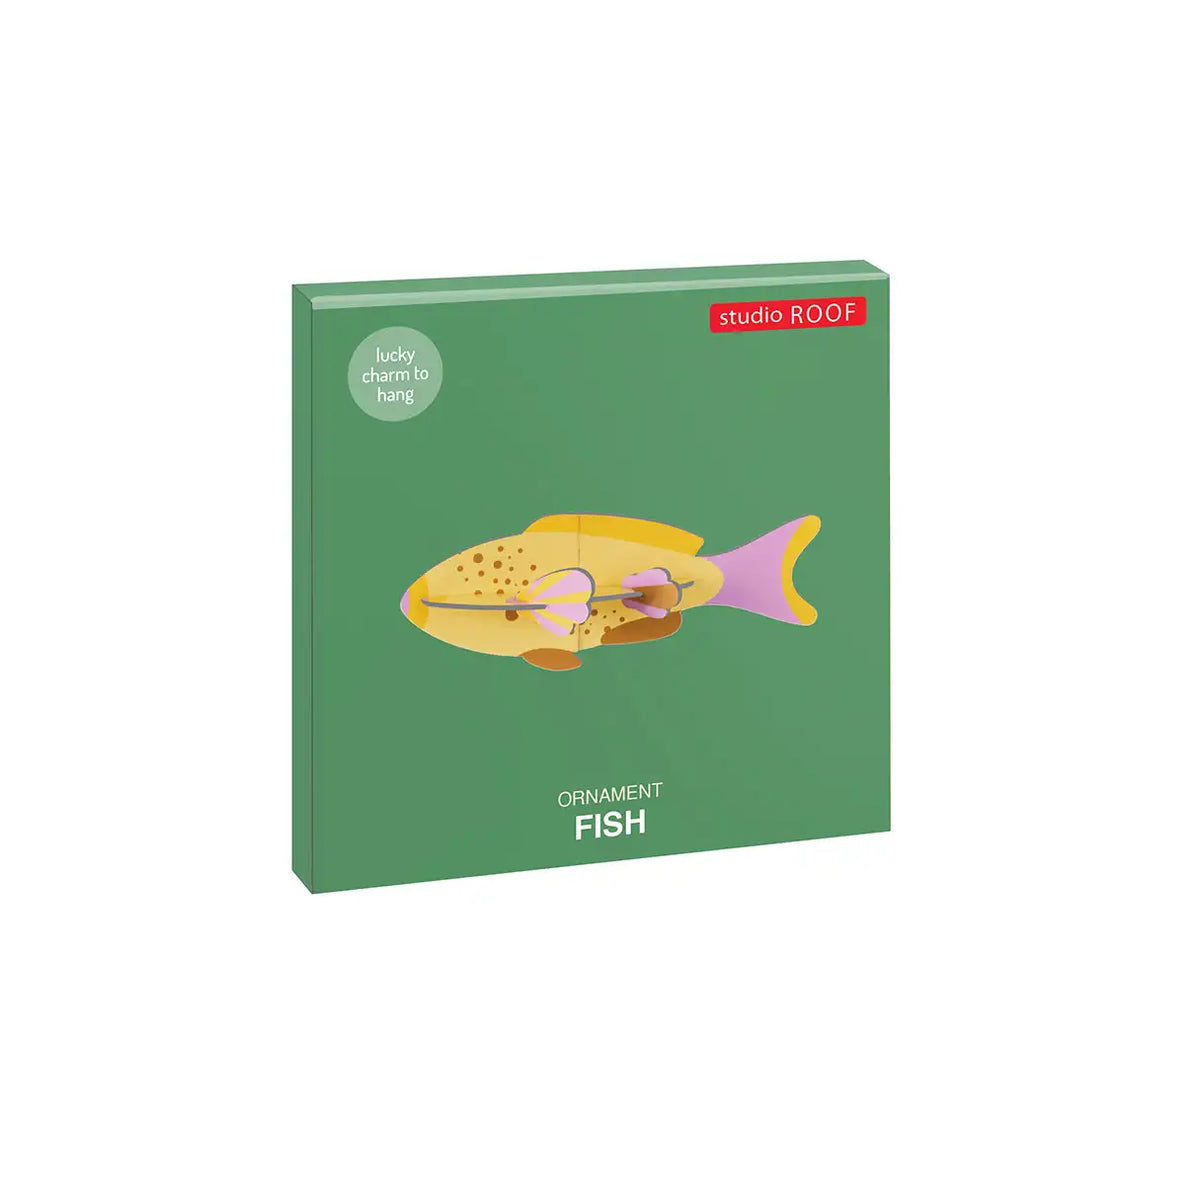 FISH_ORNAMENTLUCKY-CHARM_Studio-Roof_MOCKUP-PACKAGING_PICTURE